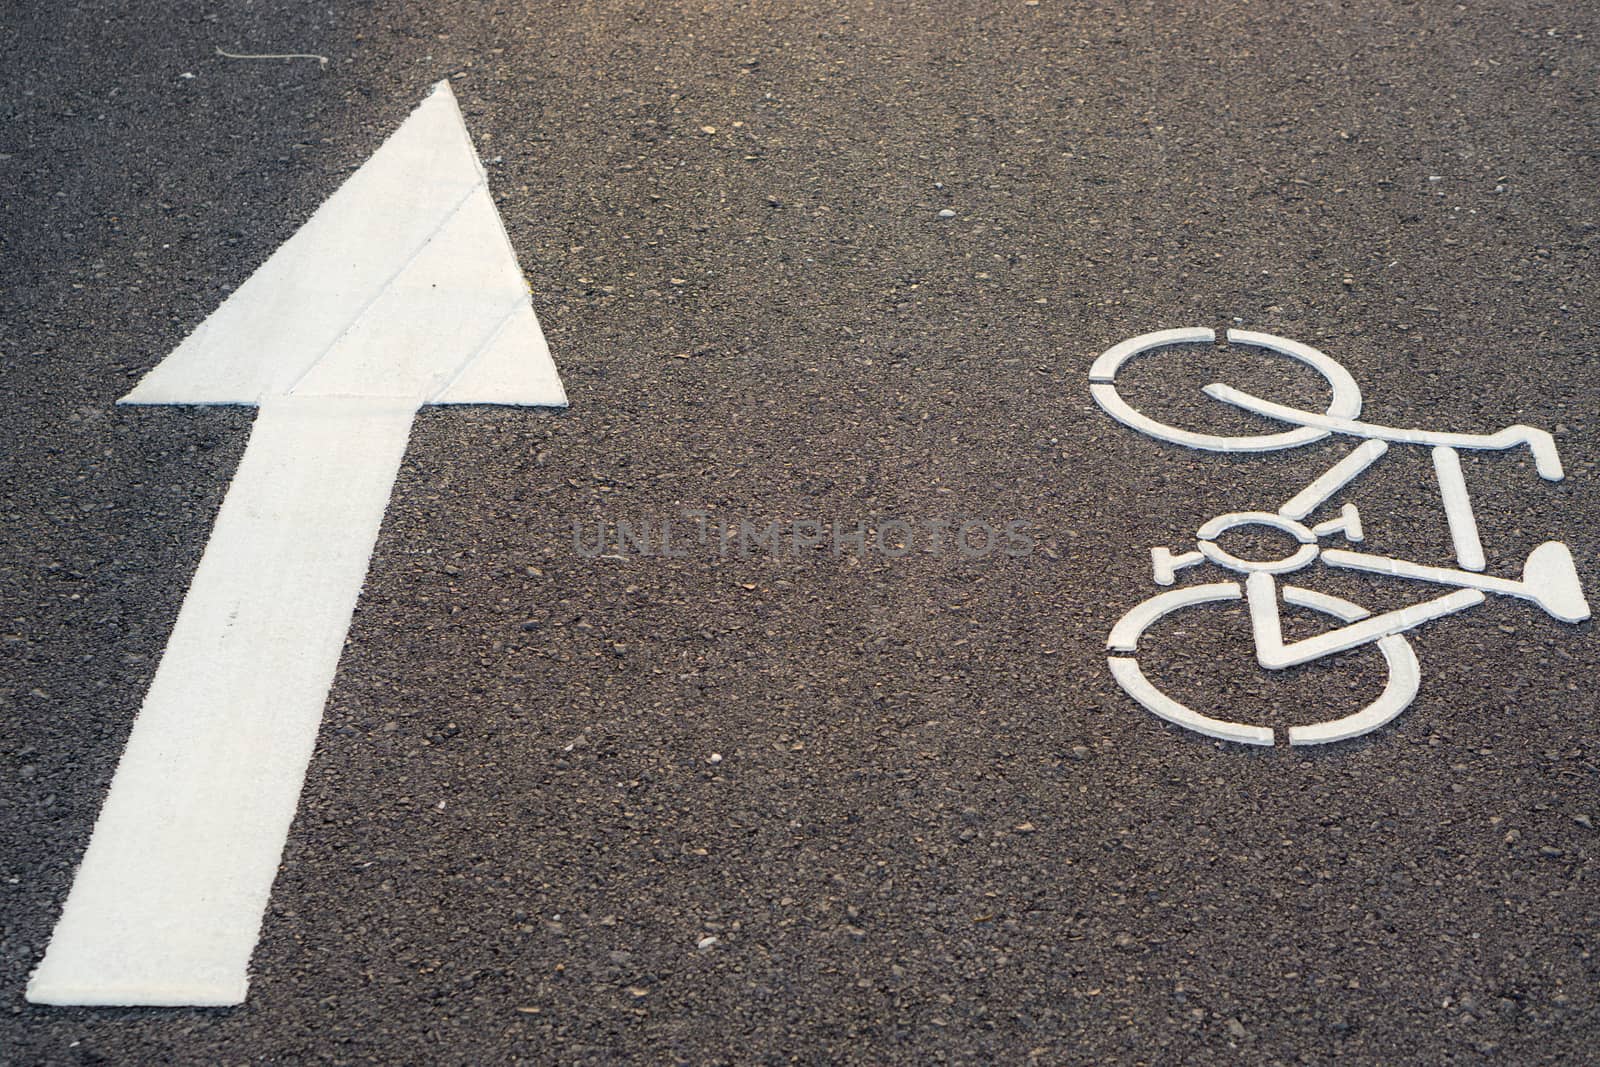 Bicycle lane marking or bike road sign with an arrow on the stre by mikesaran